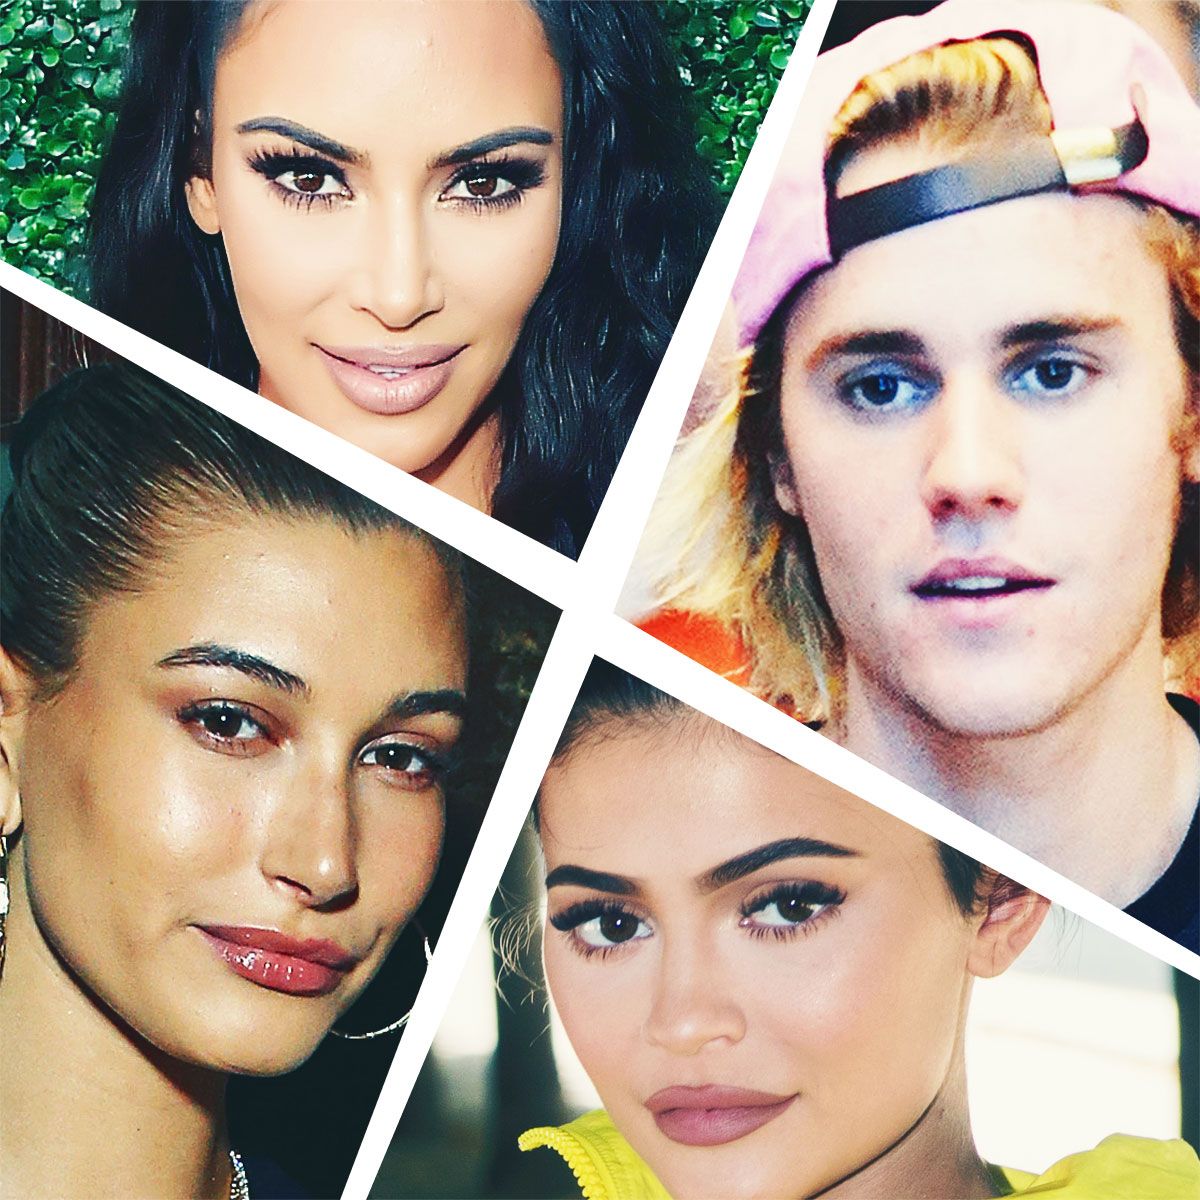 Keep Up! It's The Complete Kardashian Family Tree & Pregnancy Timeline